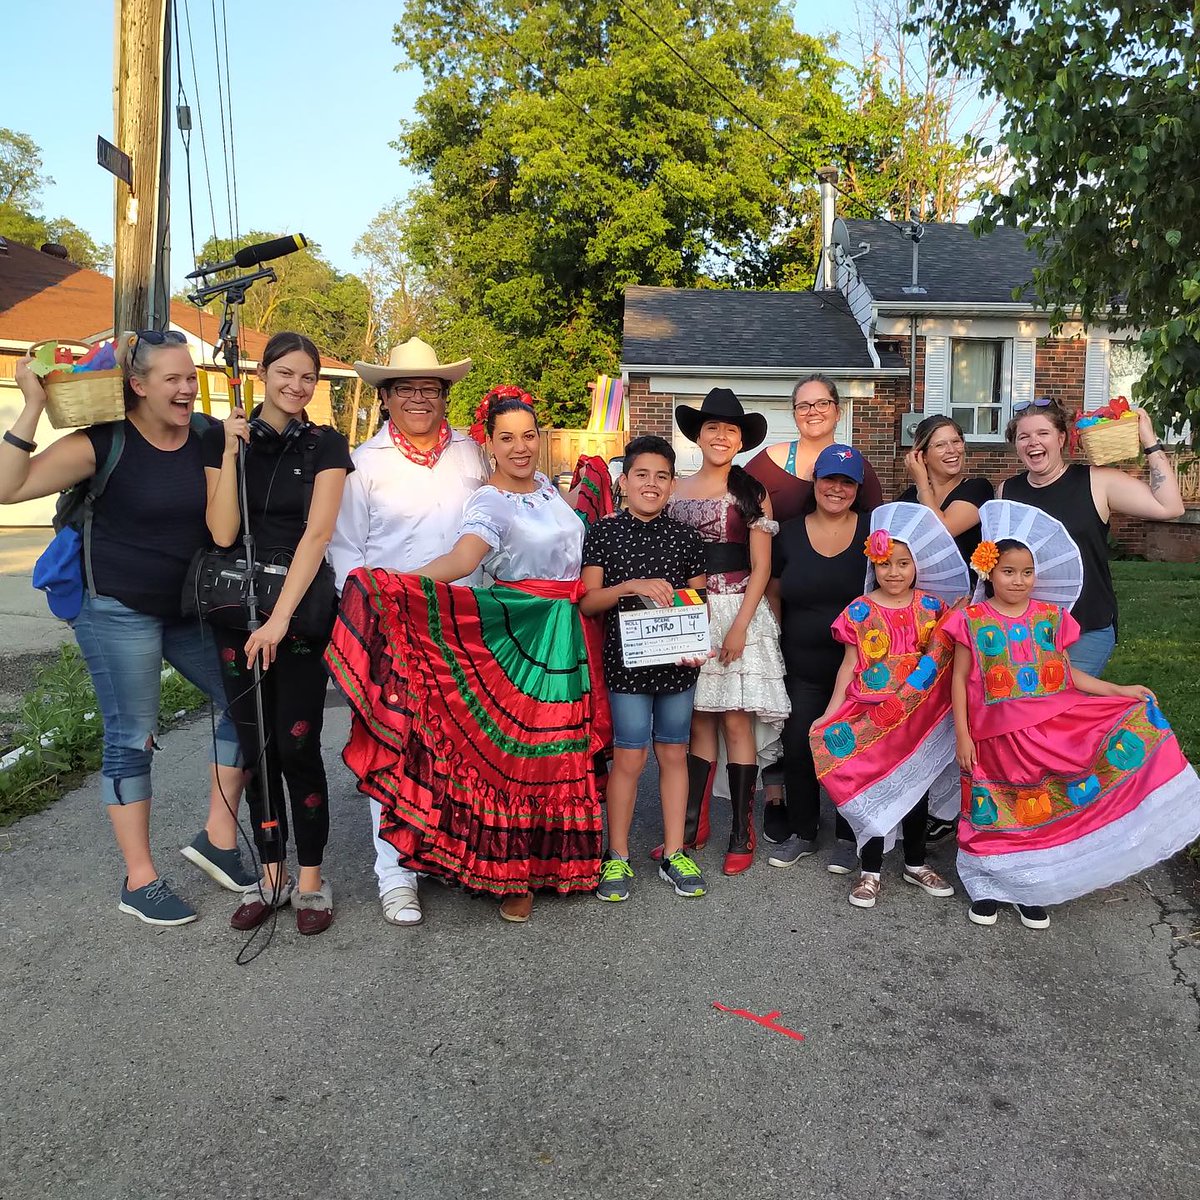 It’s our birthday week! Lopii Productions is turning 5 years old! In celebration, we will be sharing some throwbacks! Here we are filming our 4th episode of #MyHomeMyLife for @tvokids in July 2019 with Jorgito and his dancing family! 
#firstproduction #firstcrew #allfemalecrew